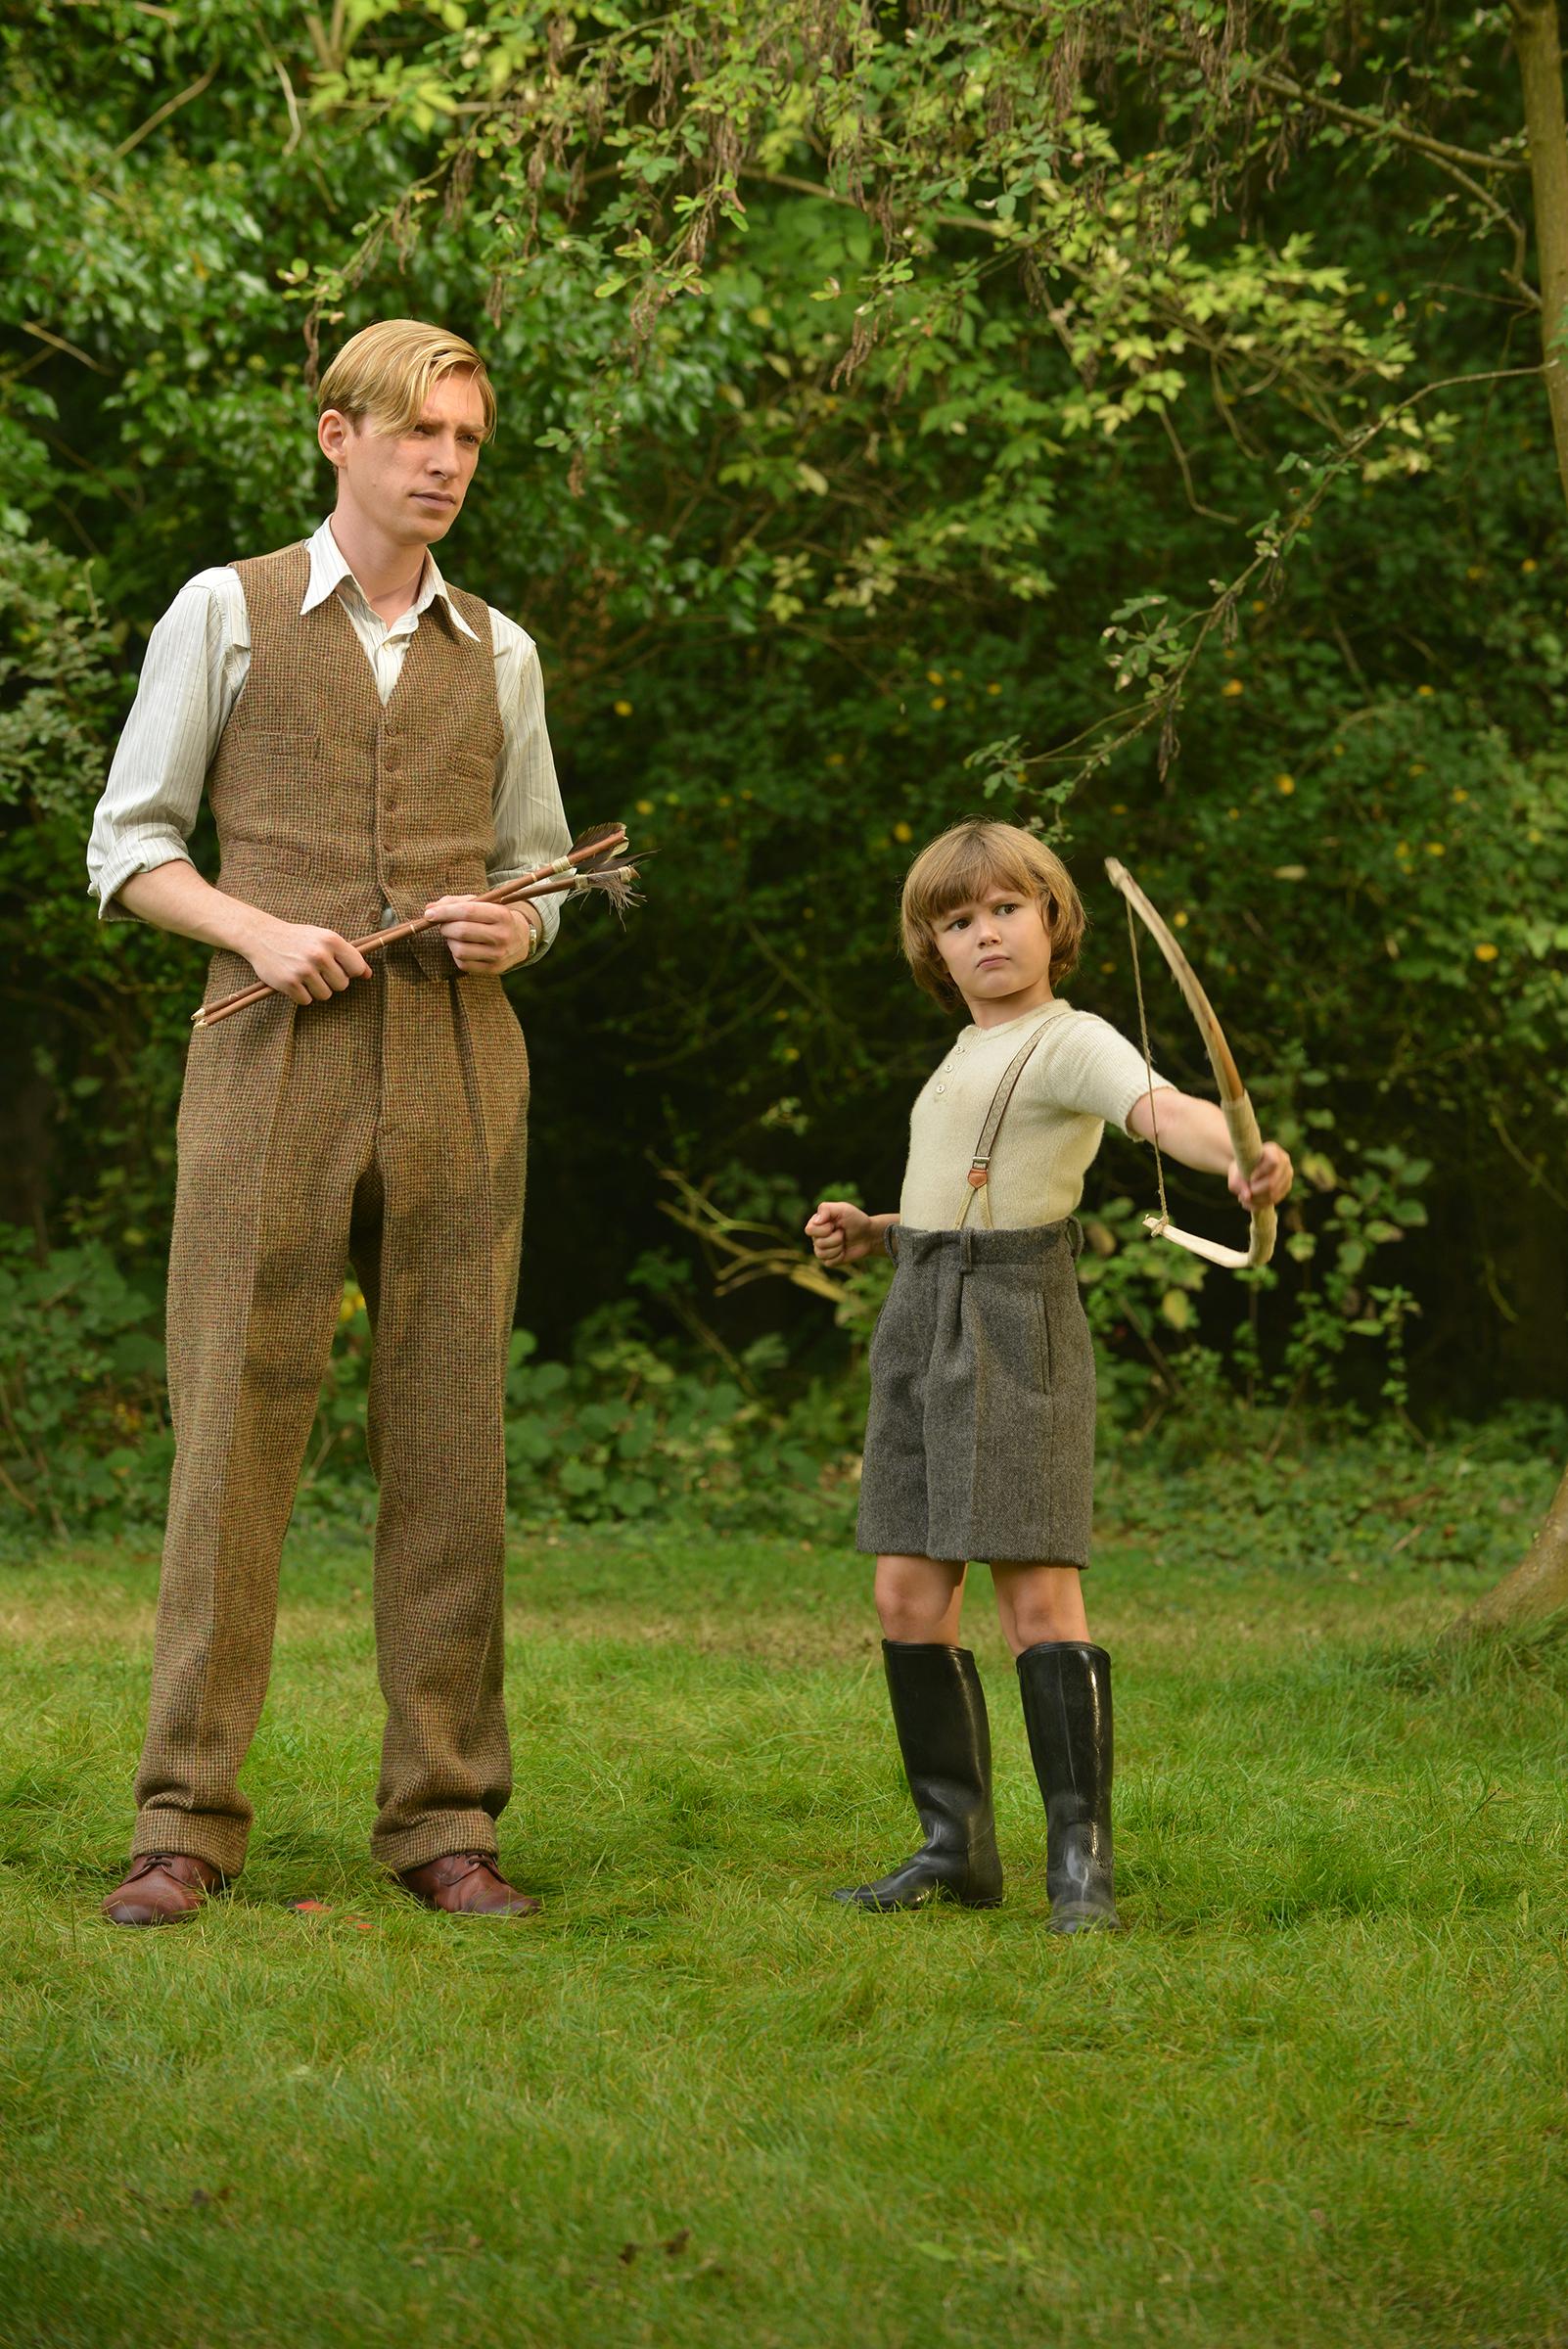 Domhnall Gleeson as 'Alan Milne' and Will Tilston as 'Christopher Robin Milne' in the film UNTITLED A.A. MILNE (David Appleby/ 2017 Fox Searchlight Pictures )